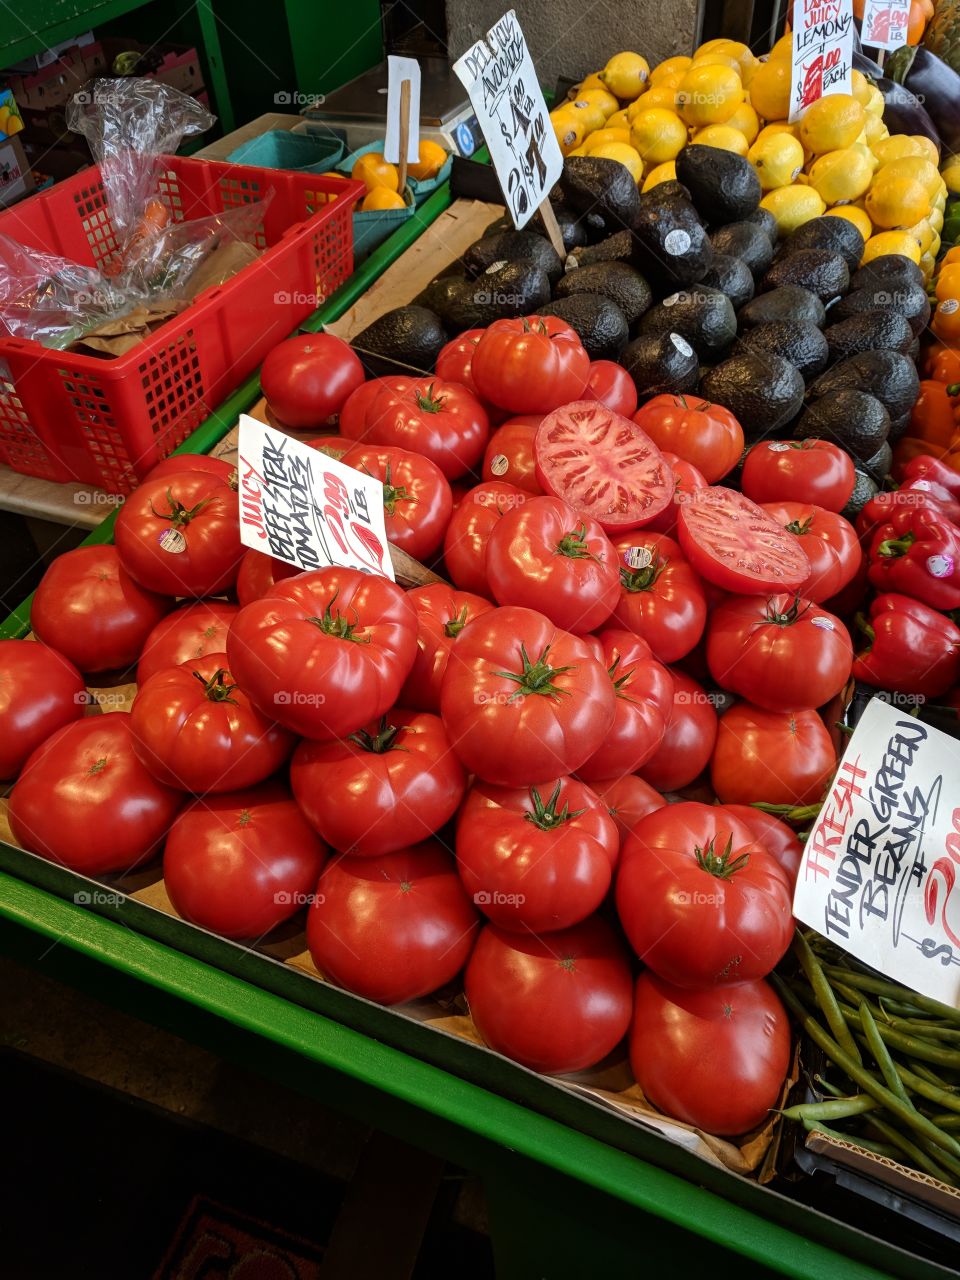 Bright, beautiful, beefsteak tomatoes, large in size, available and Pike's Market in Seattle Washington.